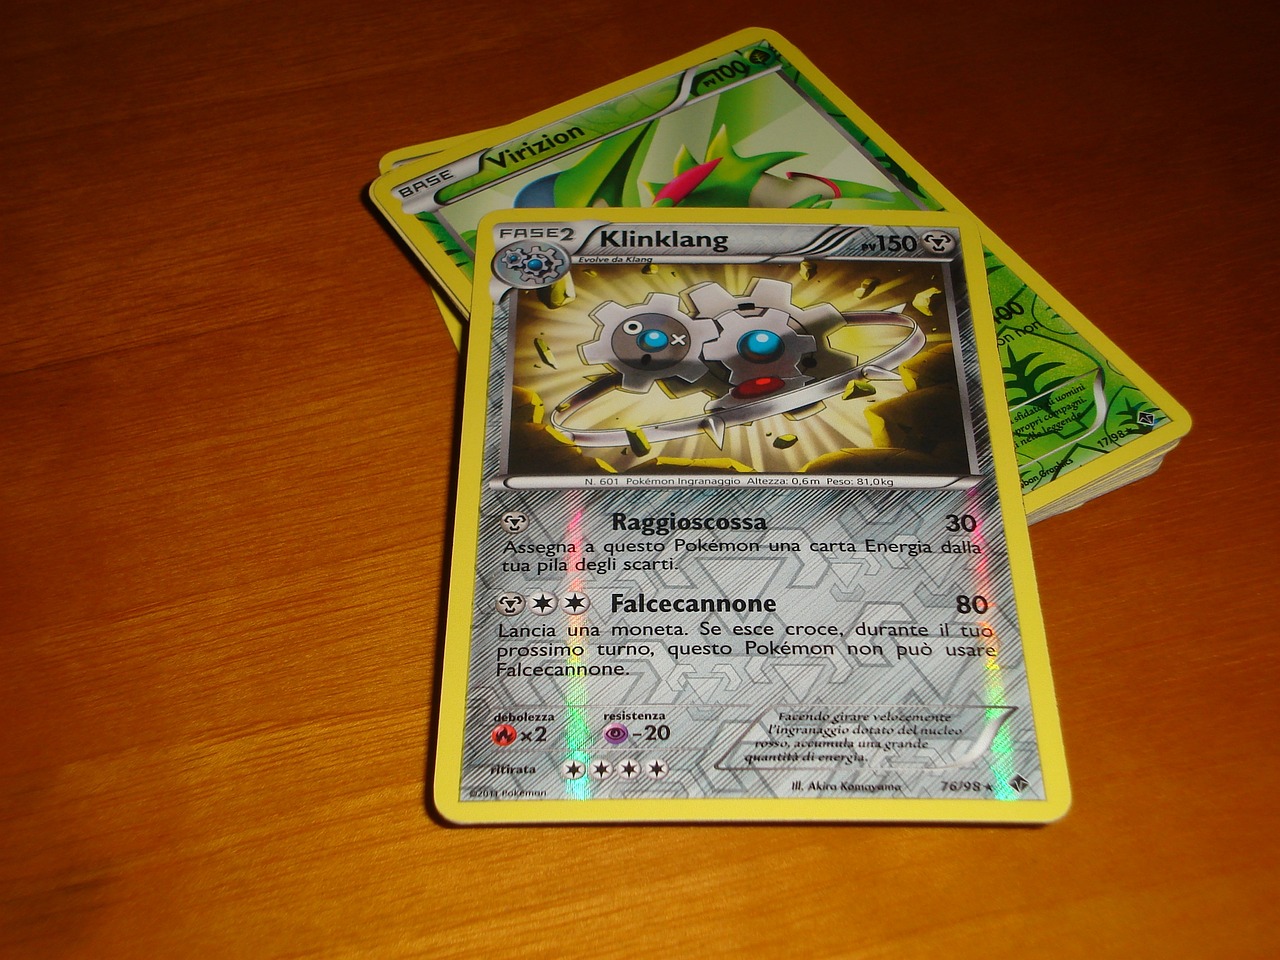 A photo of two Pokemon cards on a table.